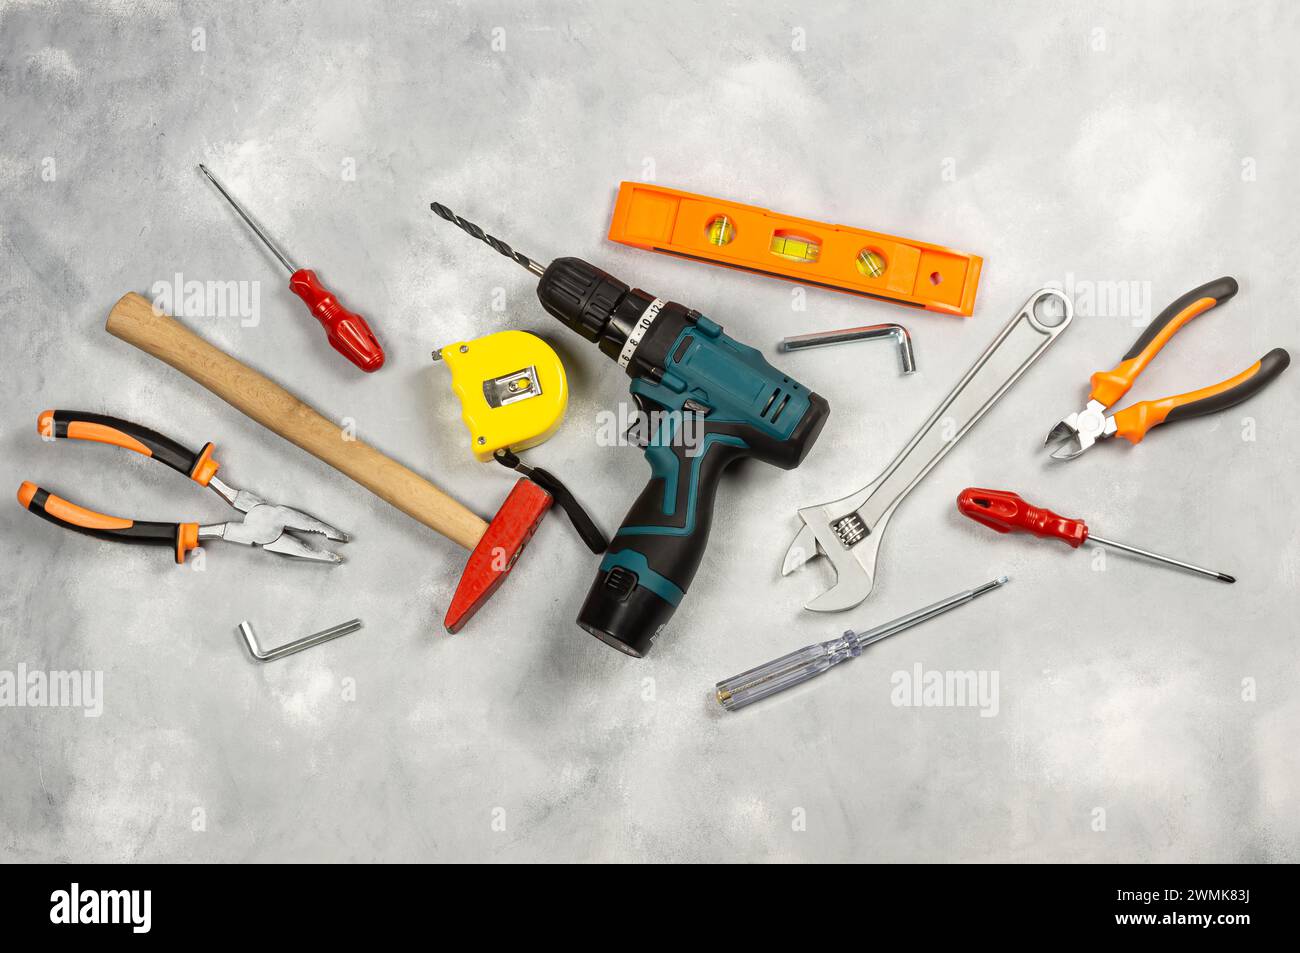 Various repair tools, hardware materials, drill, hammer, pliers, screwdriver, wrench Stock Photo